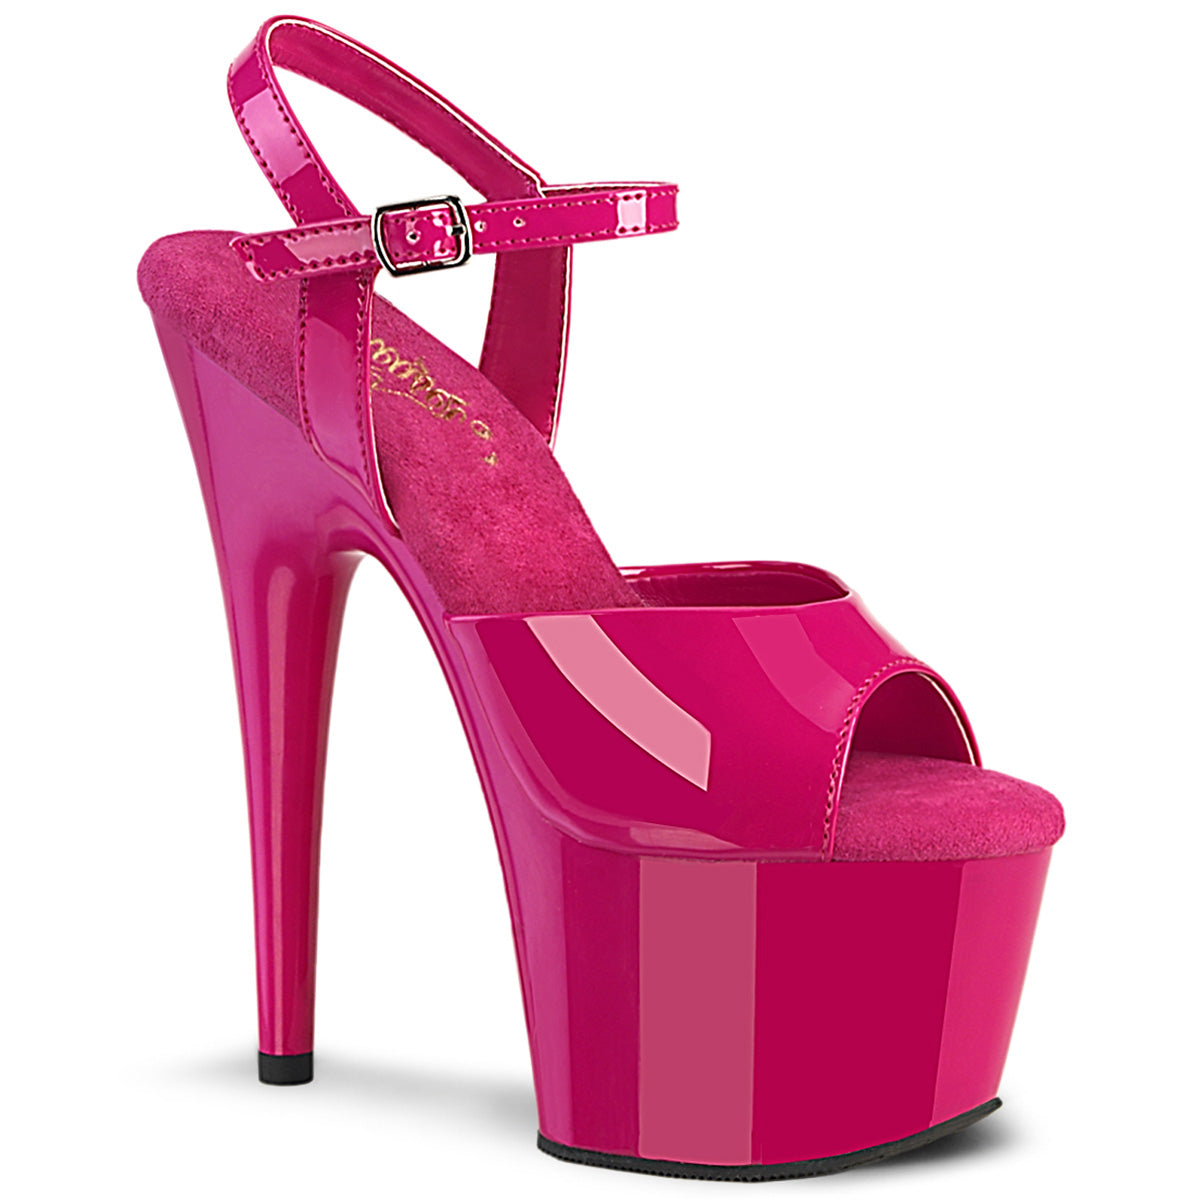 ADORE-709 Fetish Shoes Hot Pink